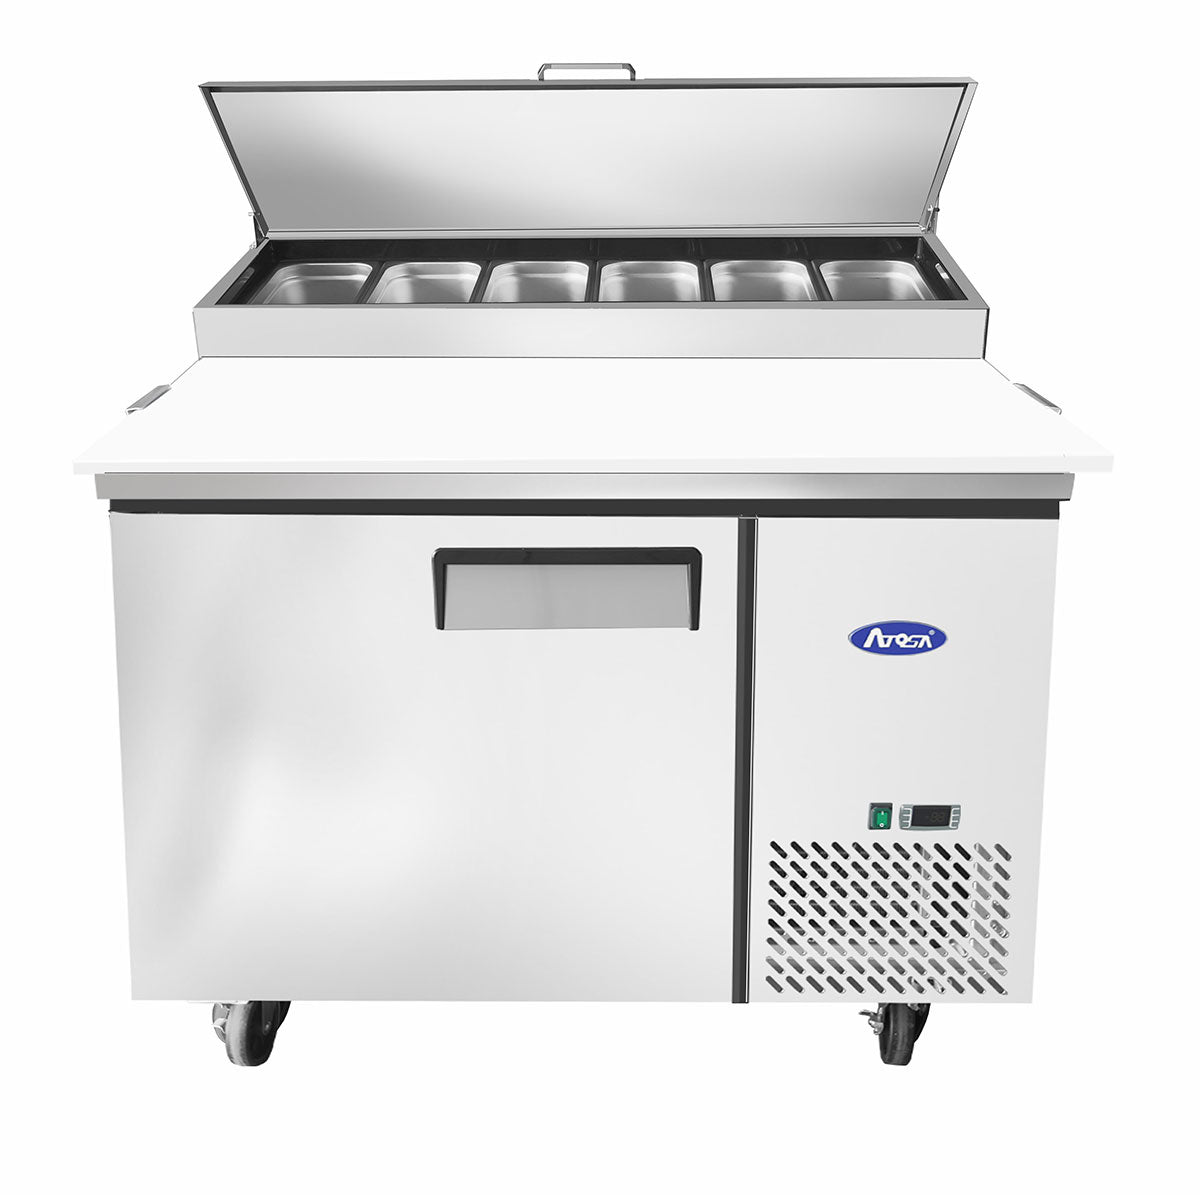 Atosa MPF8201GR 44'' Pizza Prep Table Dimensions: 44 W * 33-1/10 D * 44 H